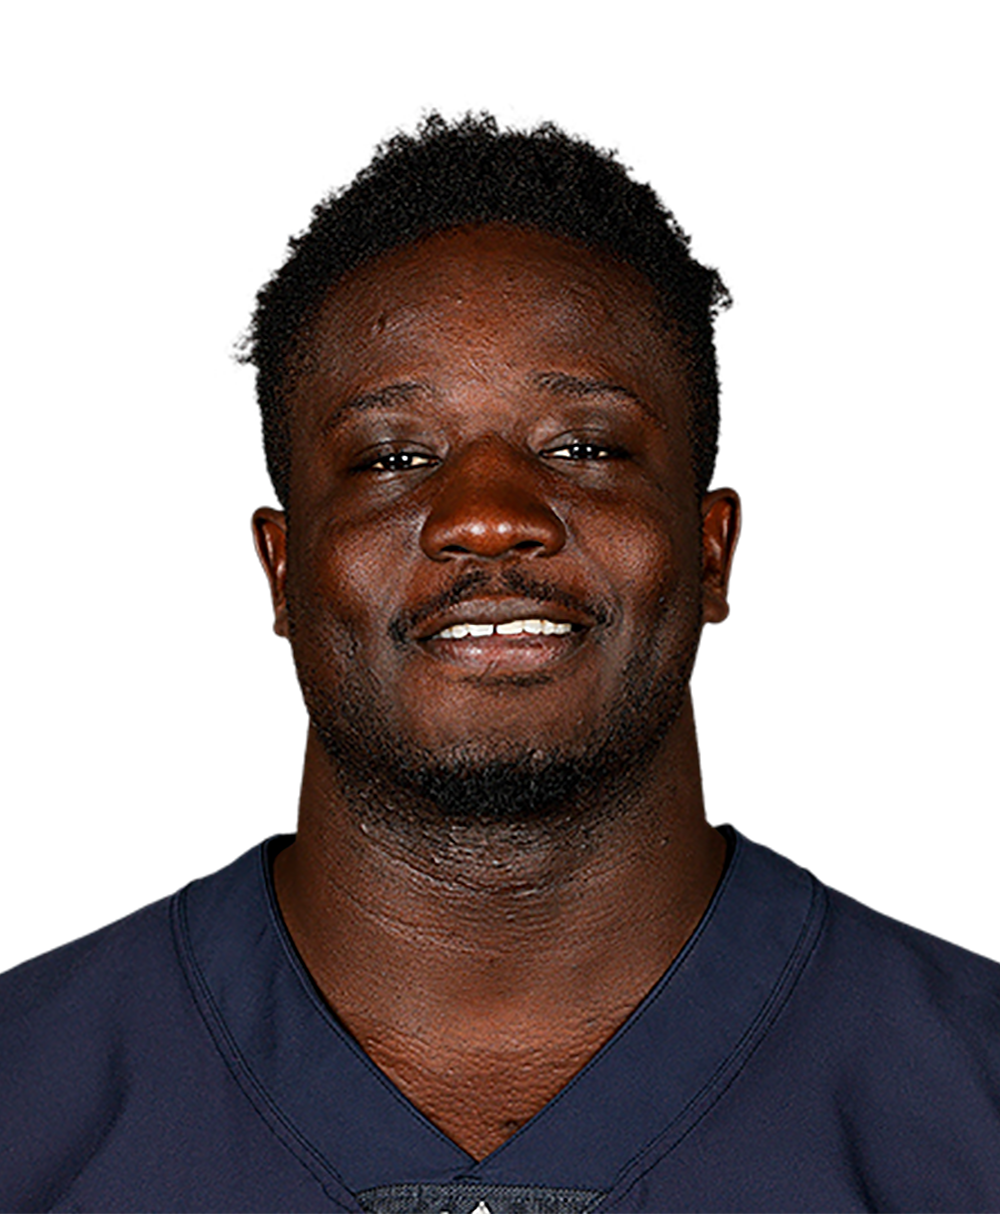 Roster Moves: Bears sign Pennel, release Attaochu